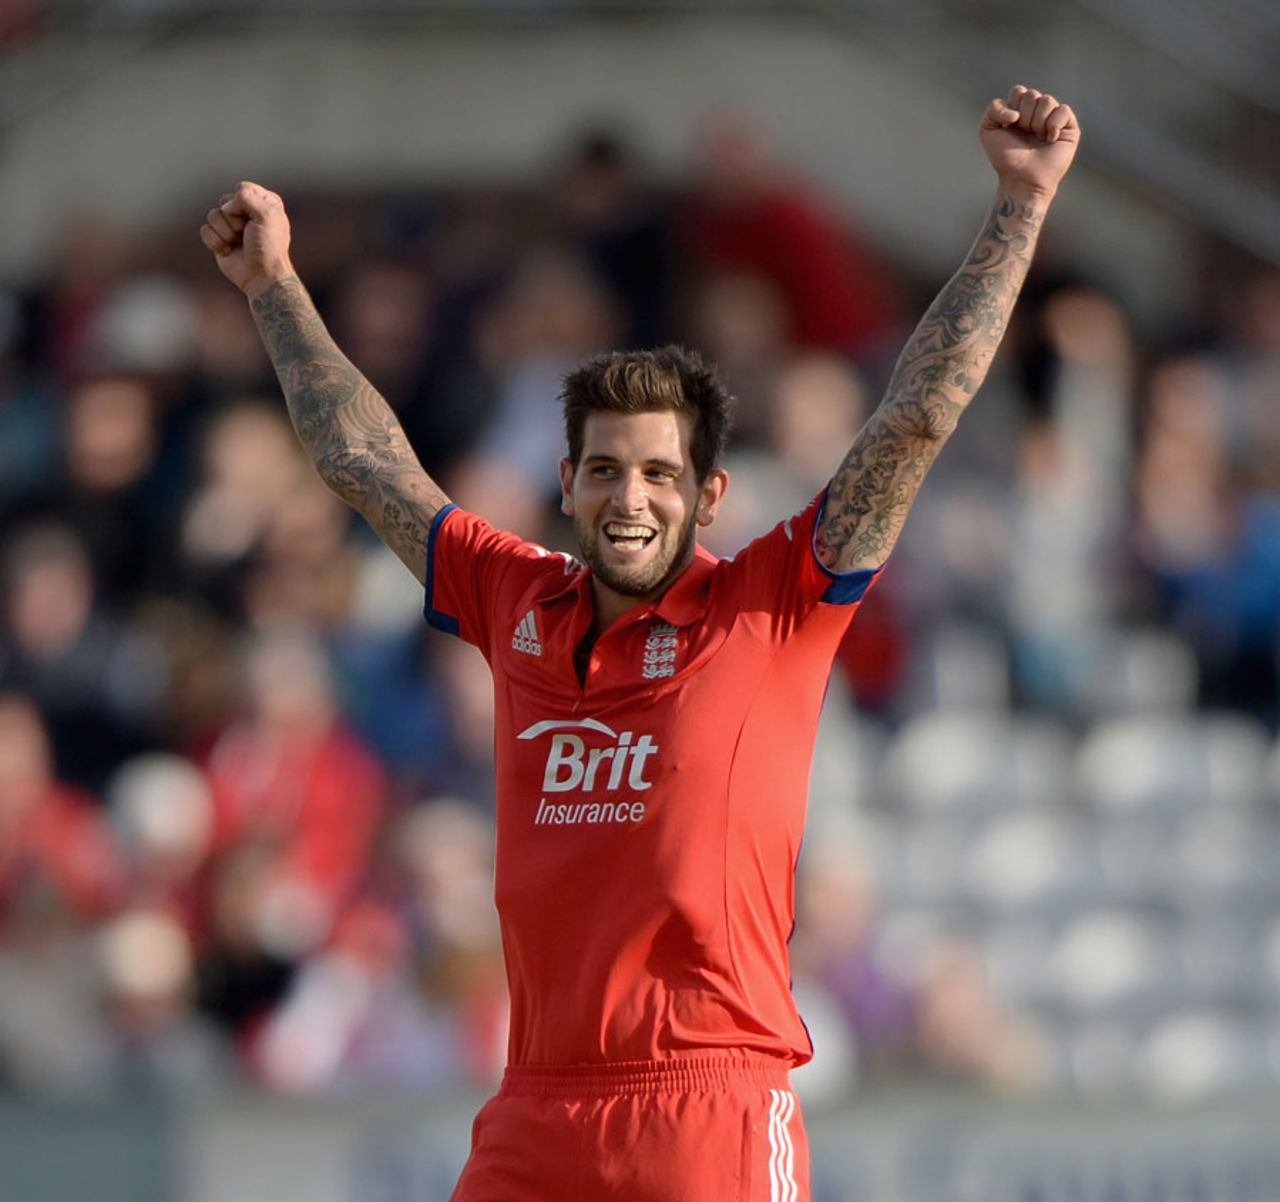 Jade Dernbach celebrates another wicket, England v Australia, 2nd T20, Chester-le-Street, August 31, 2013